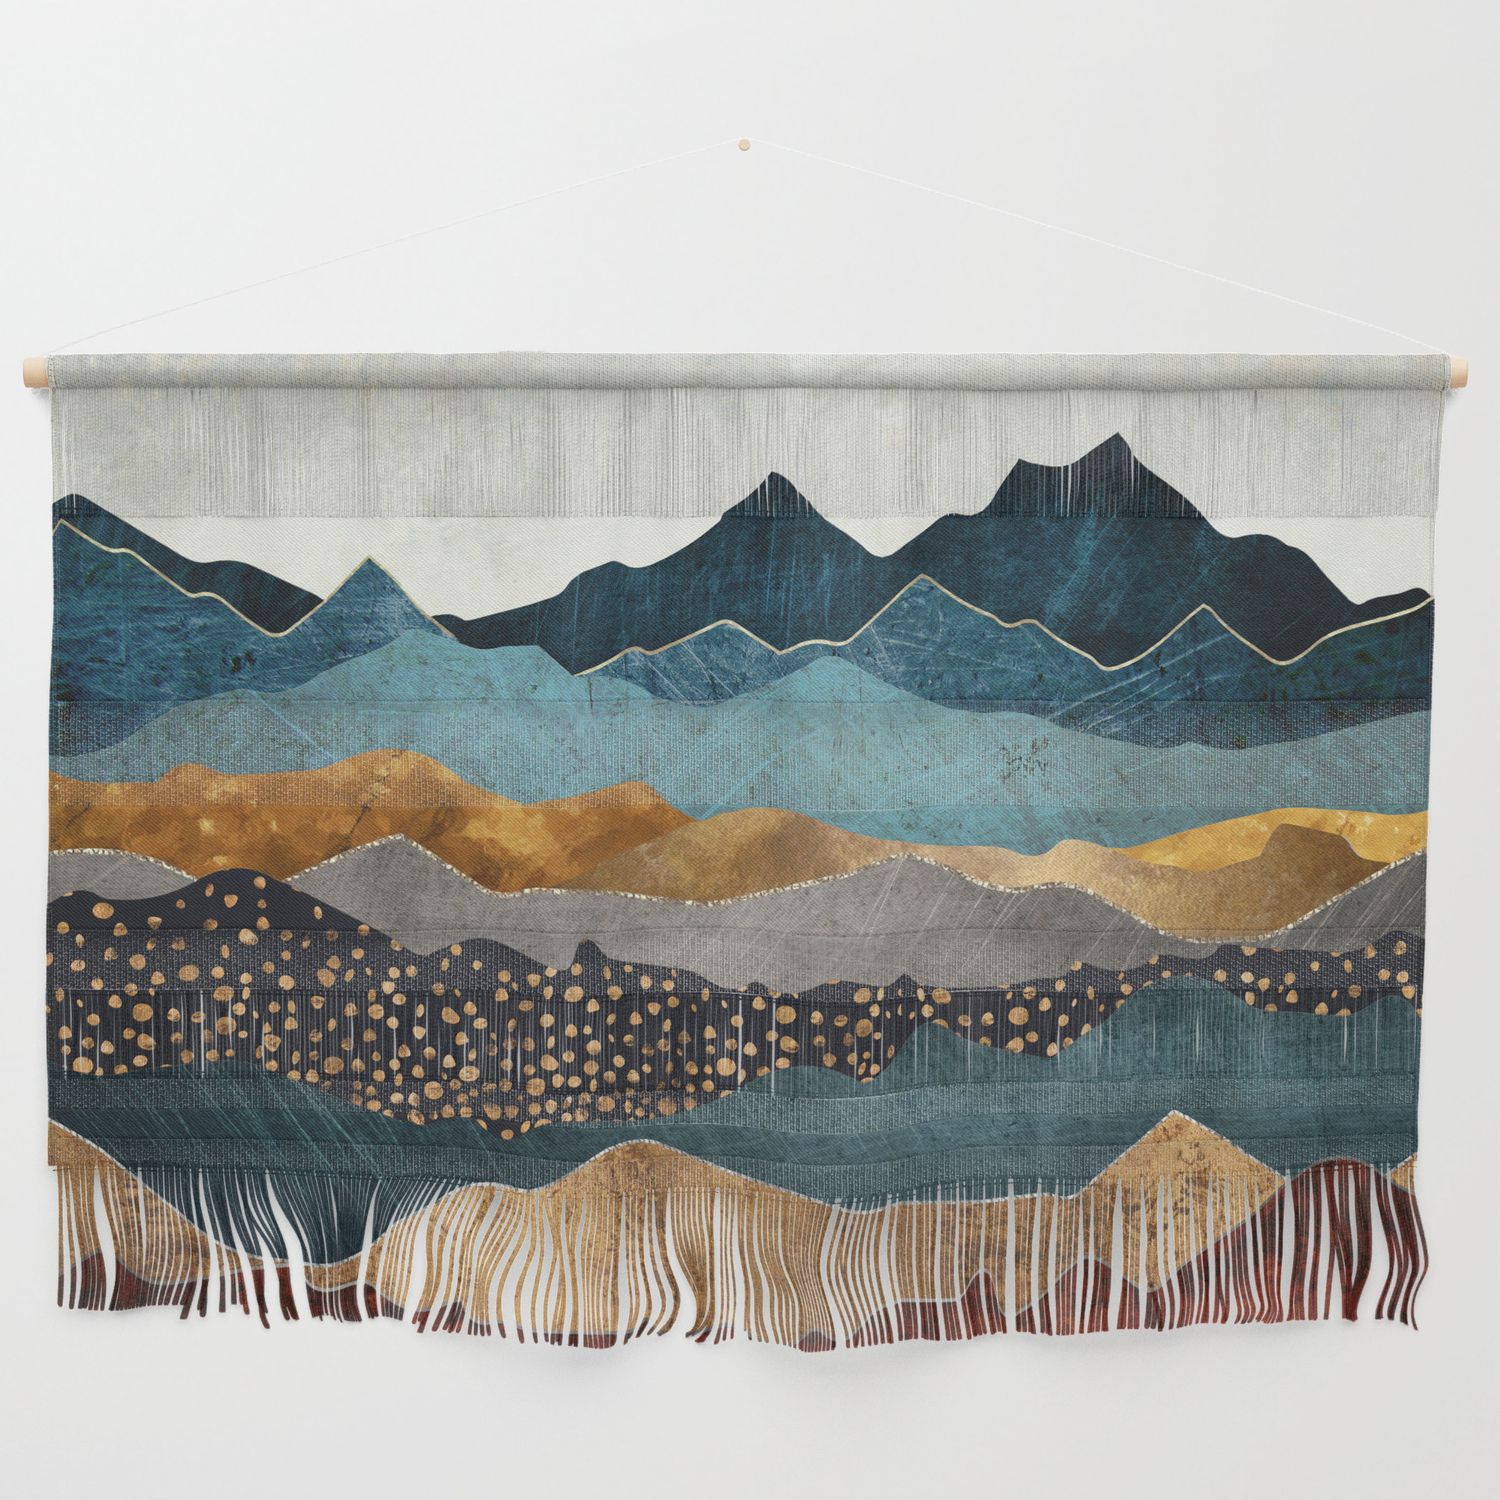 Amber Dusk Wall Hangingspacefrogdesigns | Society6 Intended For Most Popular Amber Dusk Wood Wall Art (View 6 of 20)